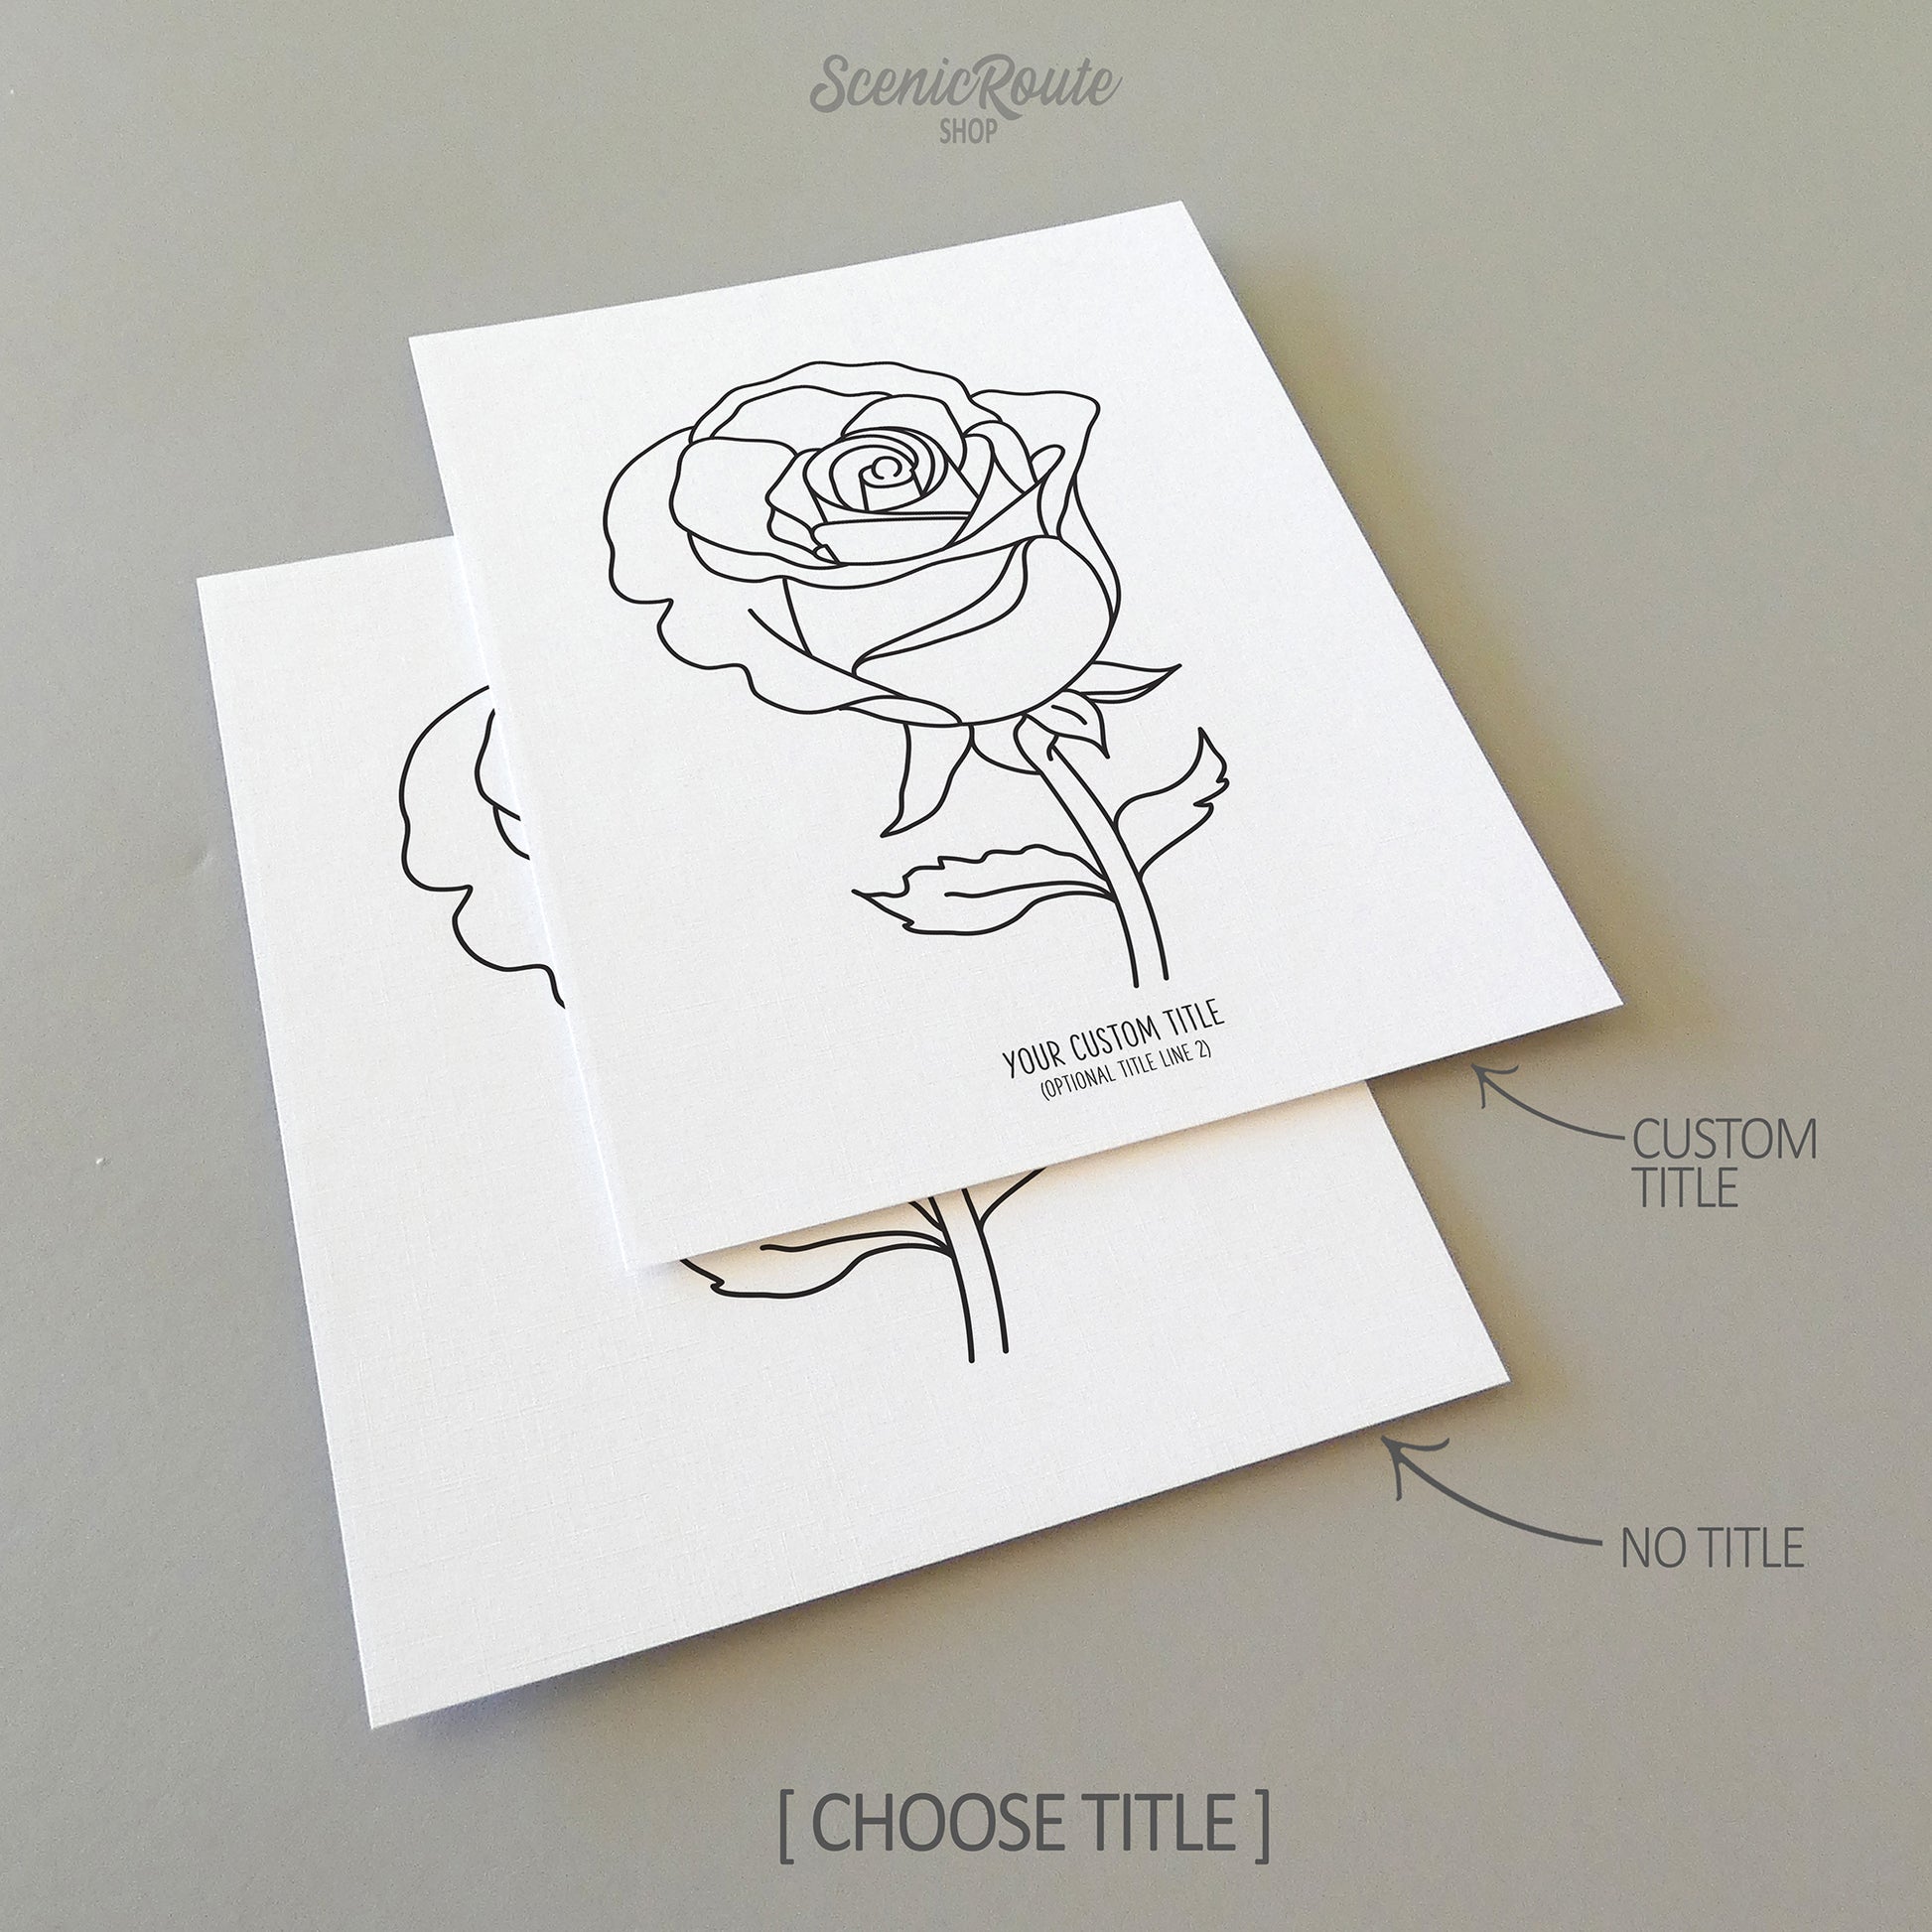 Two line art drawings of a Rose Flower on white linen paper with a gray background.  The pieces are shown with “No Title” and “Custom Title” options for the available art print options.